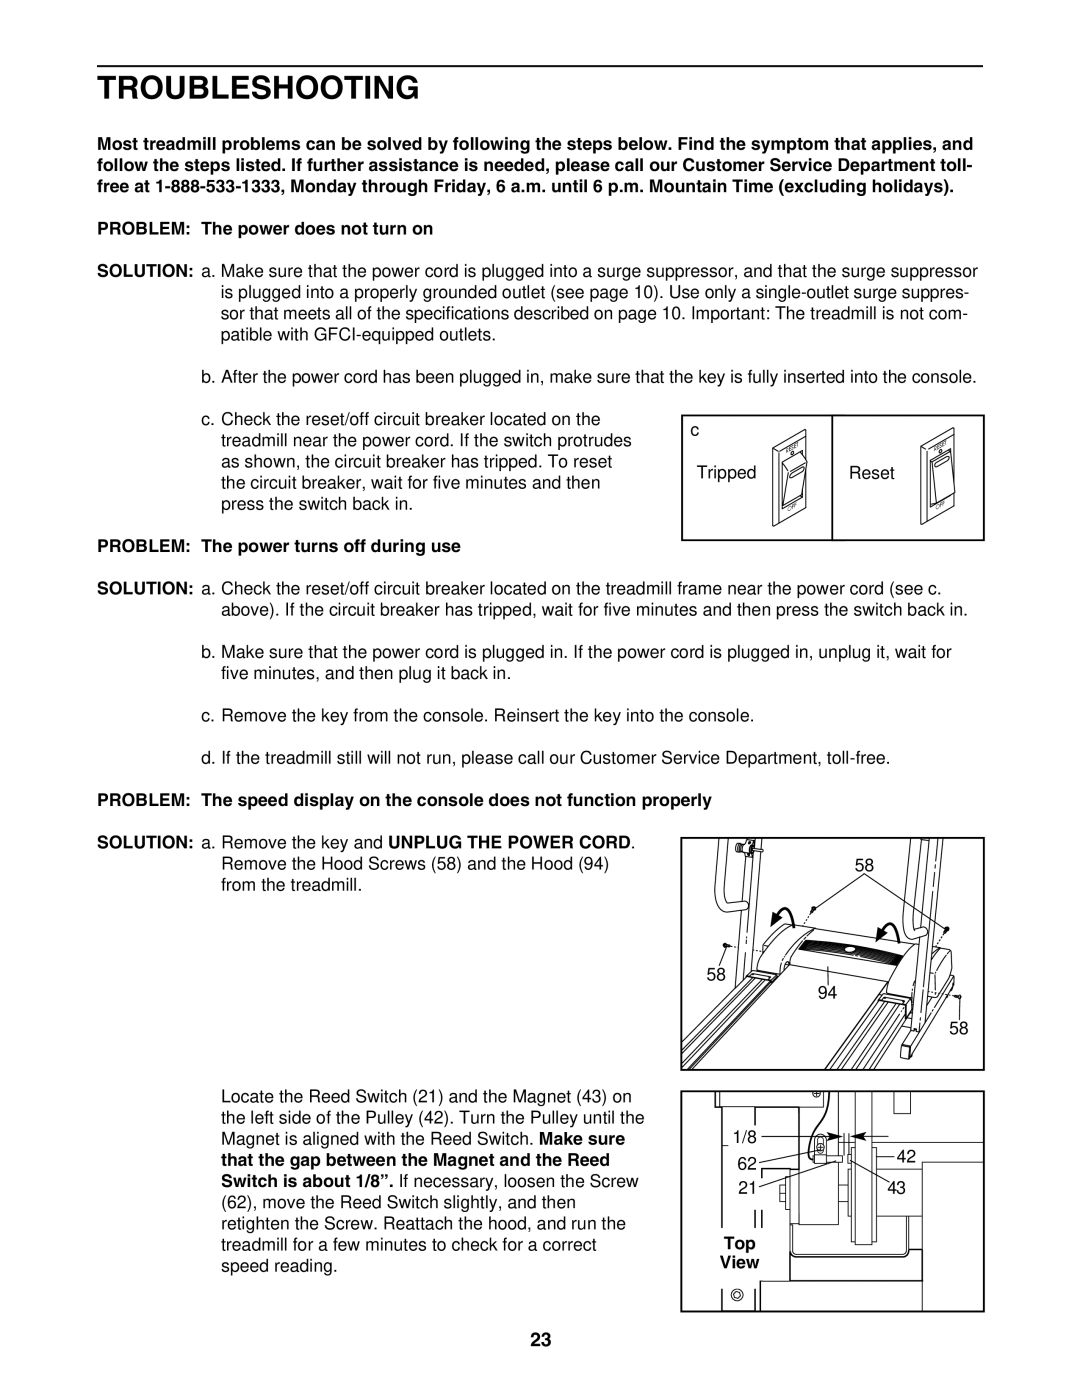 ProForm DTL44950 user manual Troubleshooting, Problem The power turns off during use, Top 